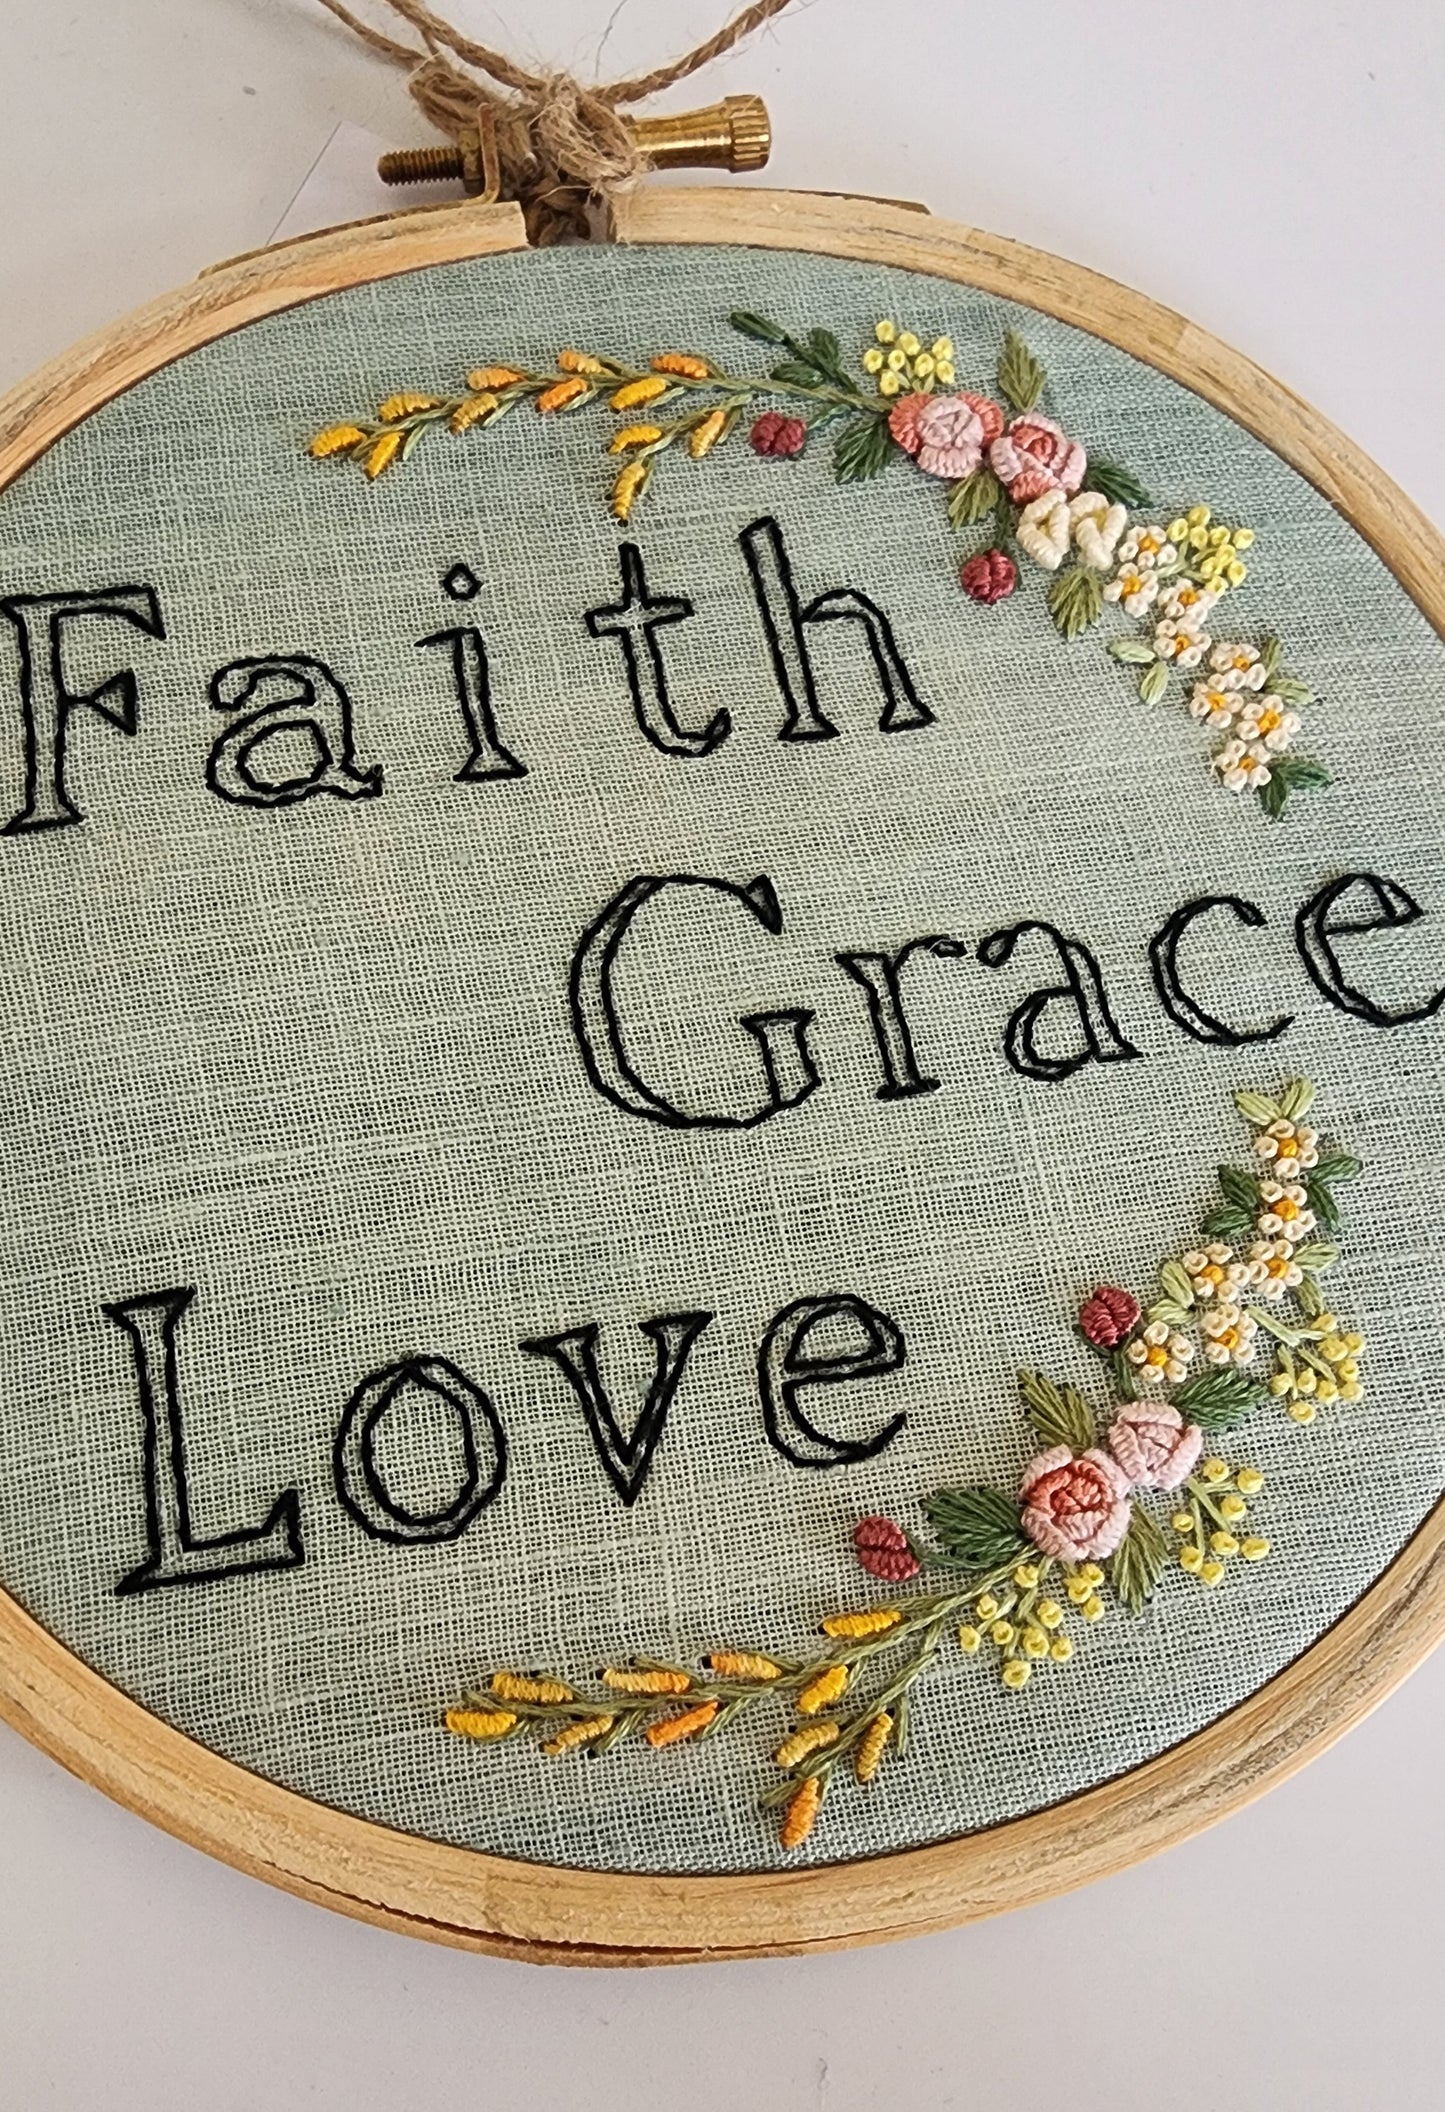 Ikali - Faith Grace Love - Hand-embroidered Wall-hanging Hoop